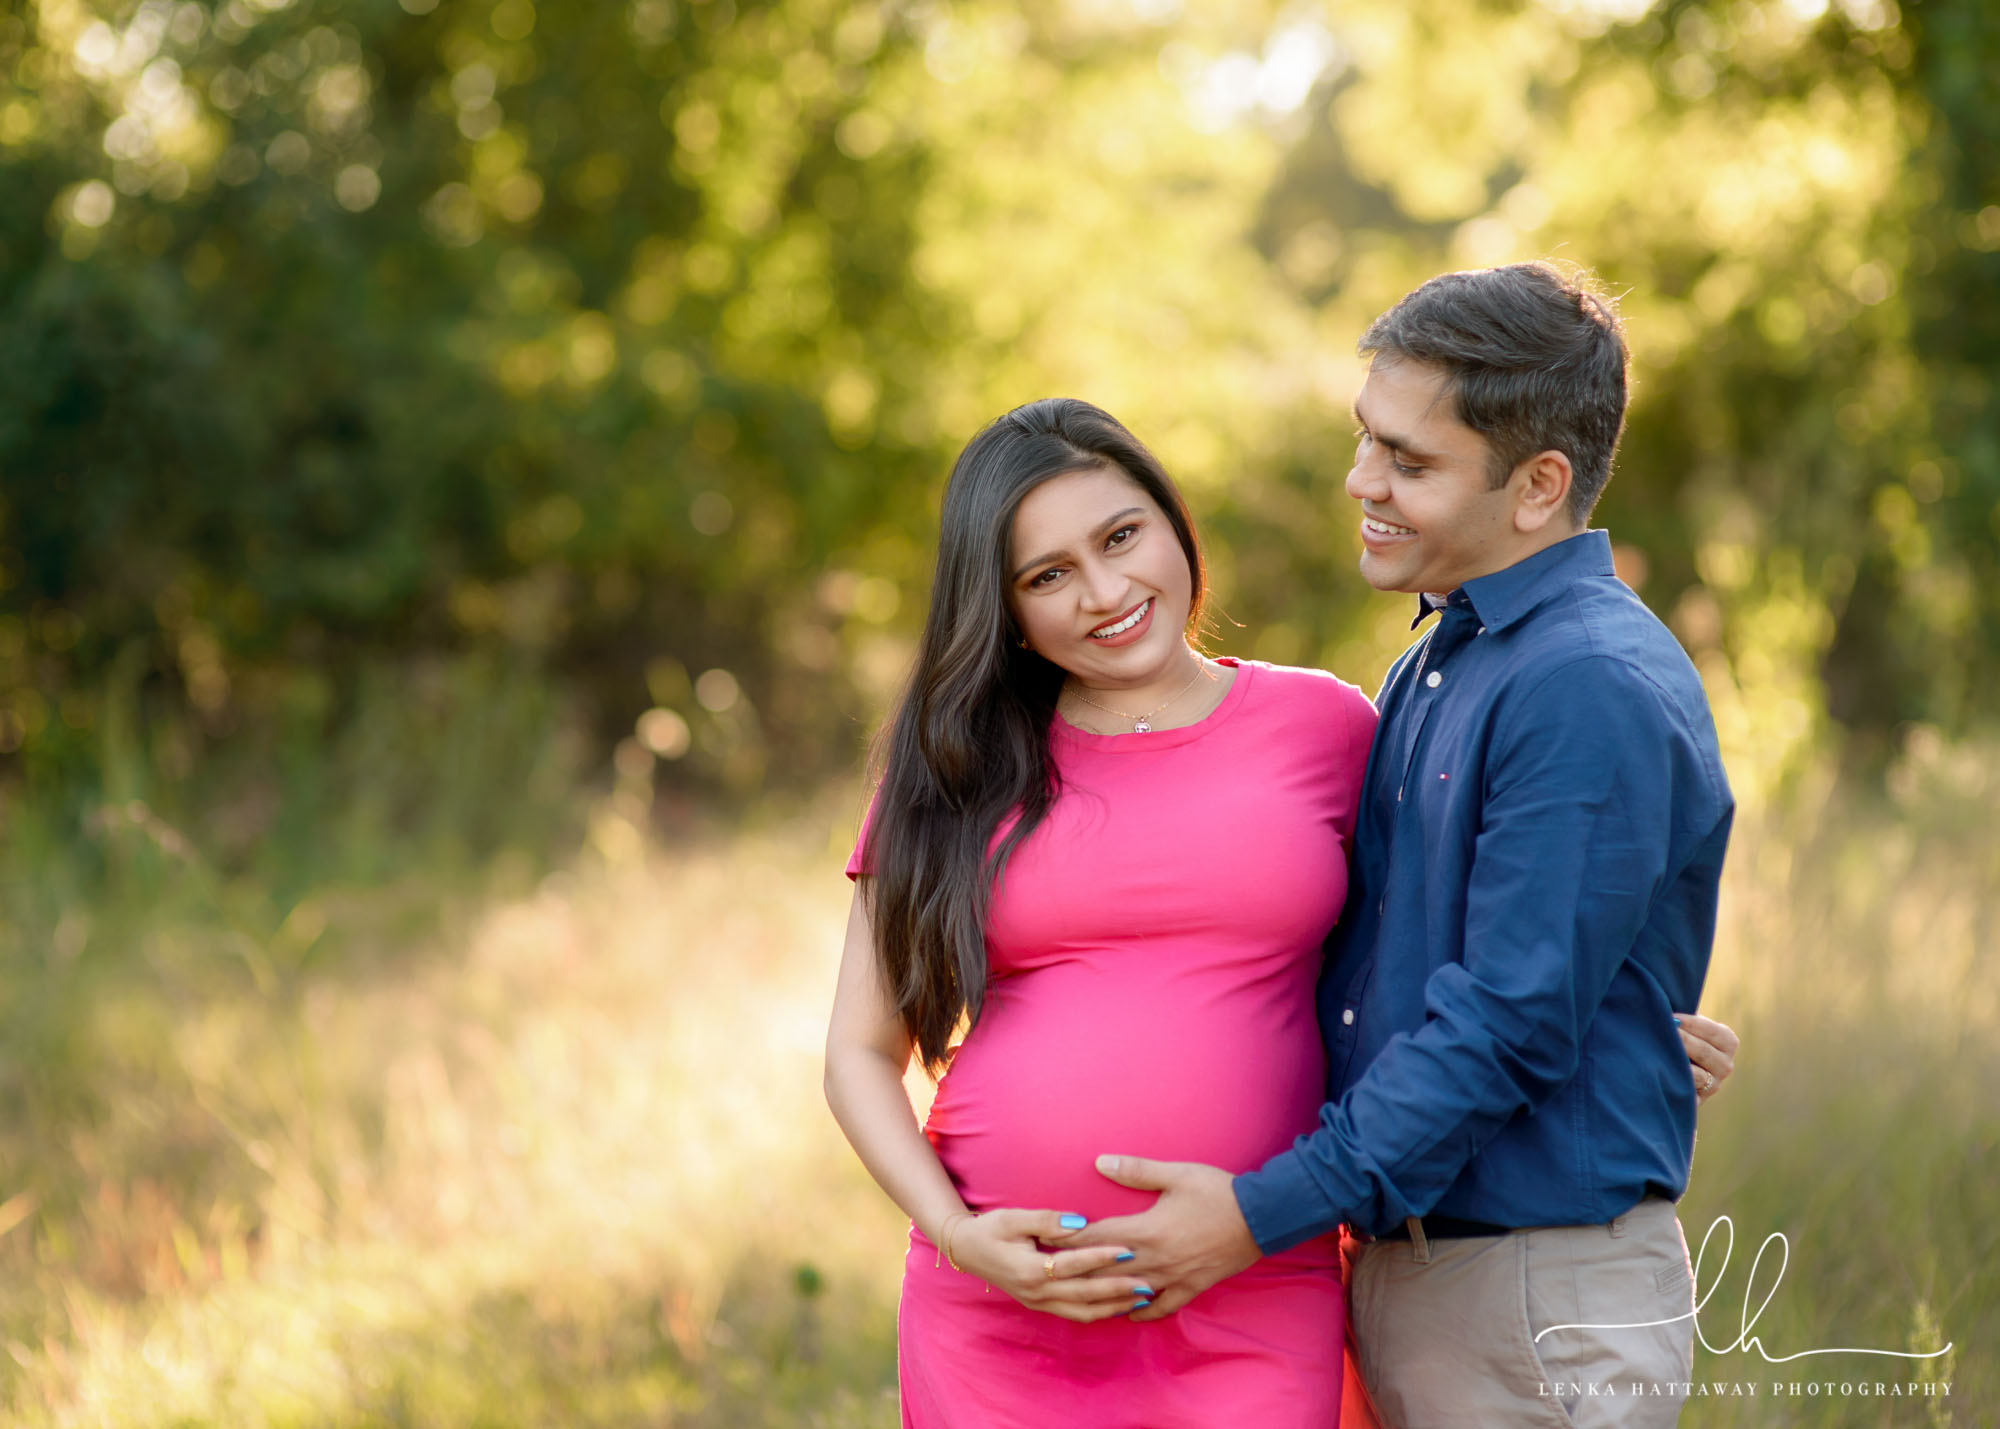 A lovely couple during their professional maternity photo session.